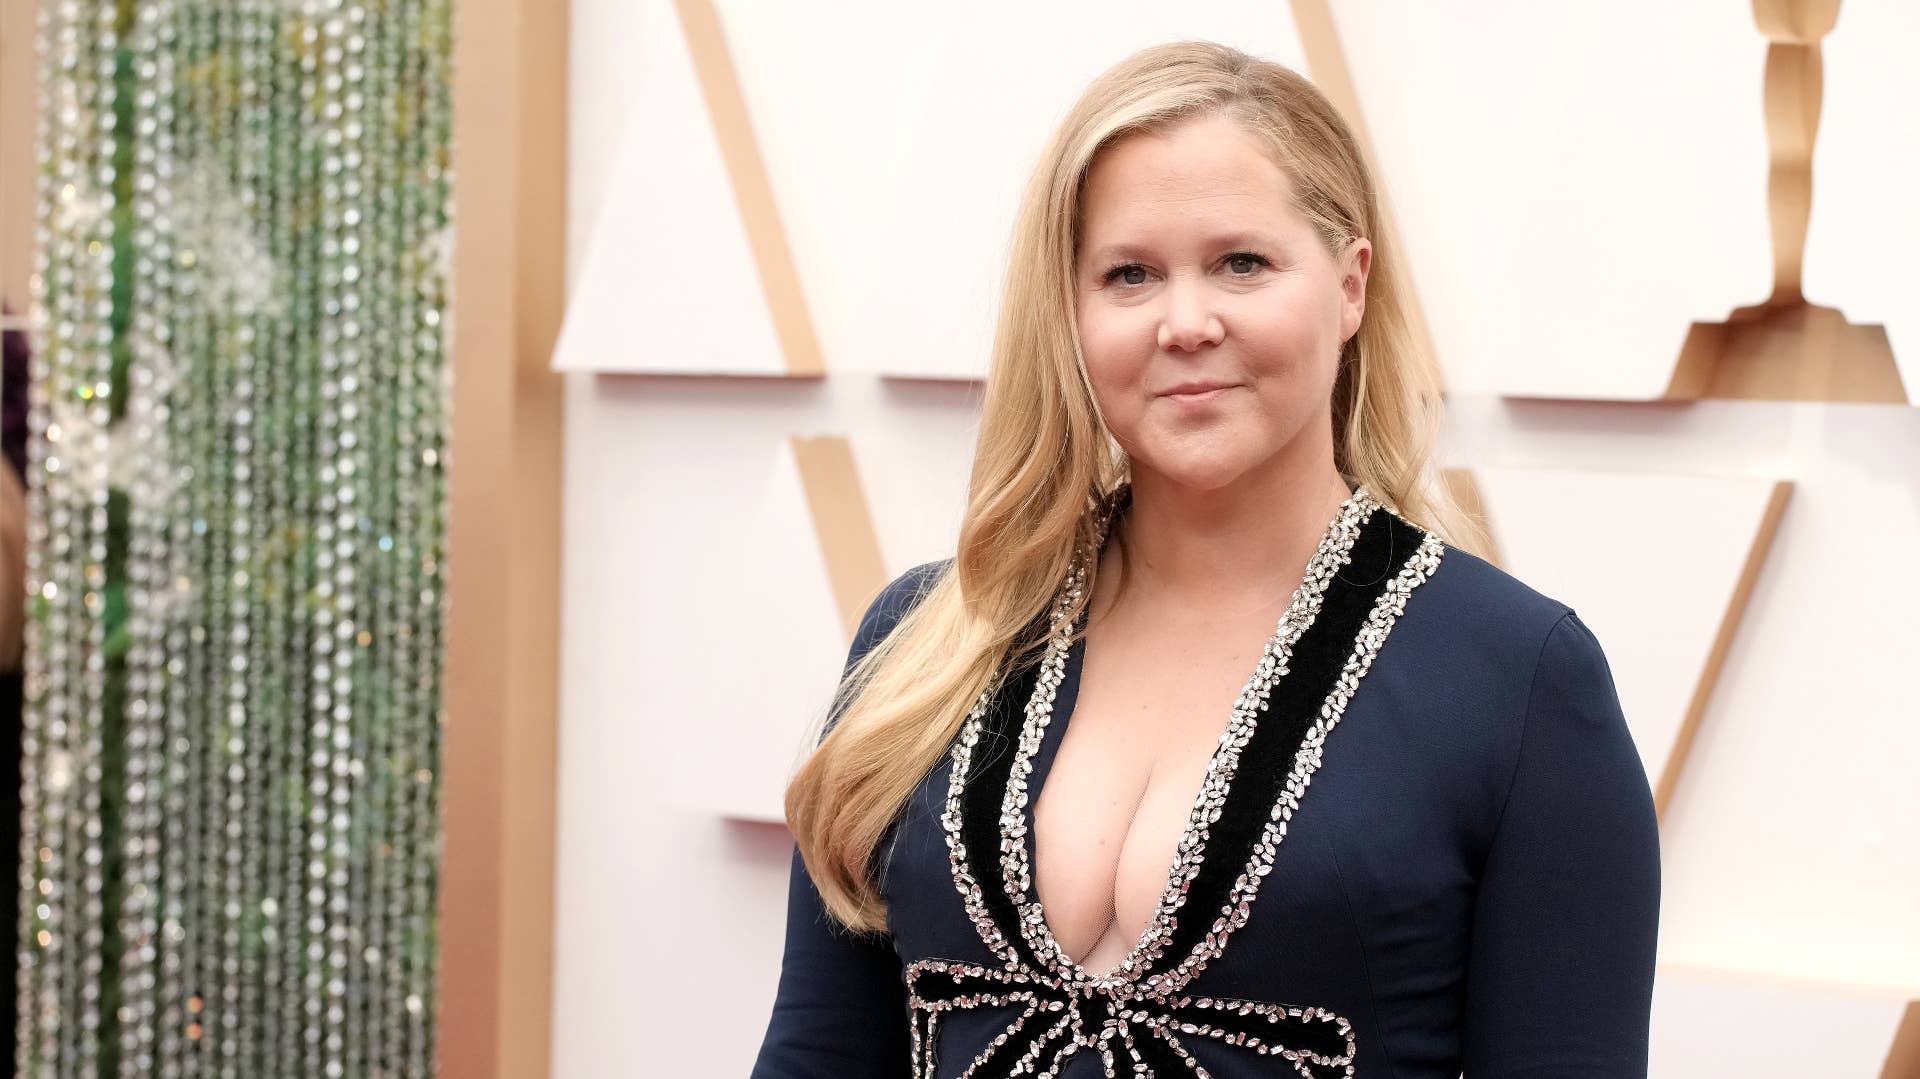 Amy Schumer attends the Annual Academy Awards in 2022.